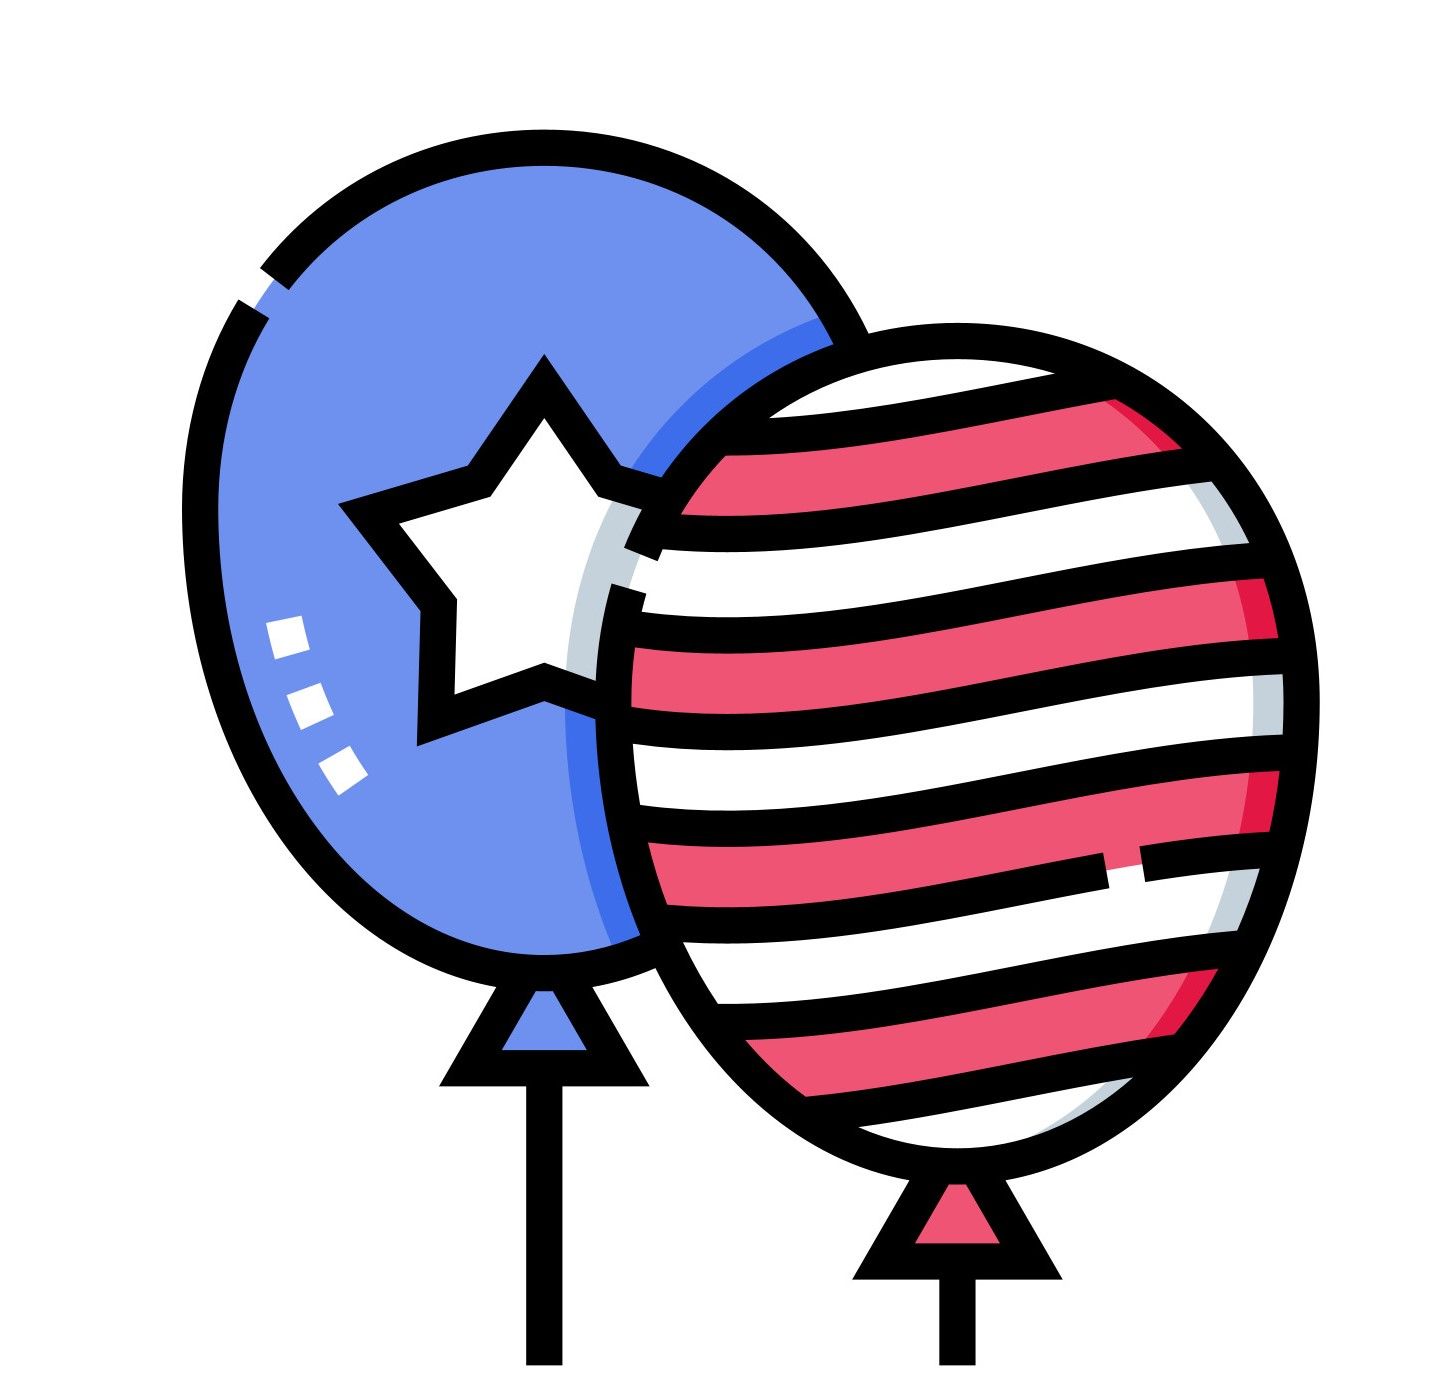 A blue and red balloon with a star on it.